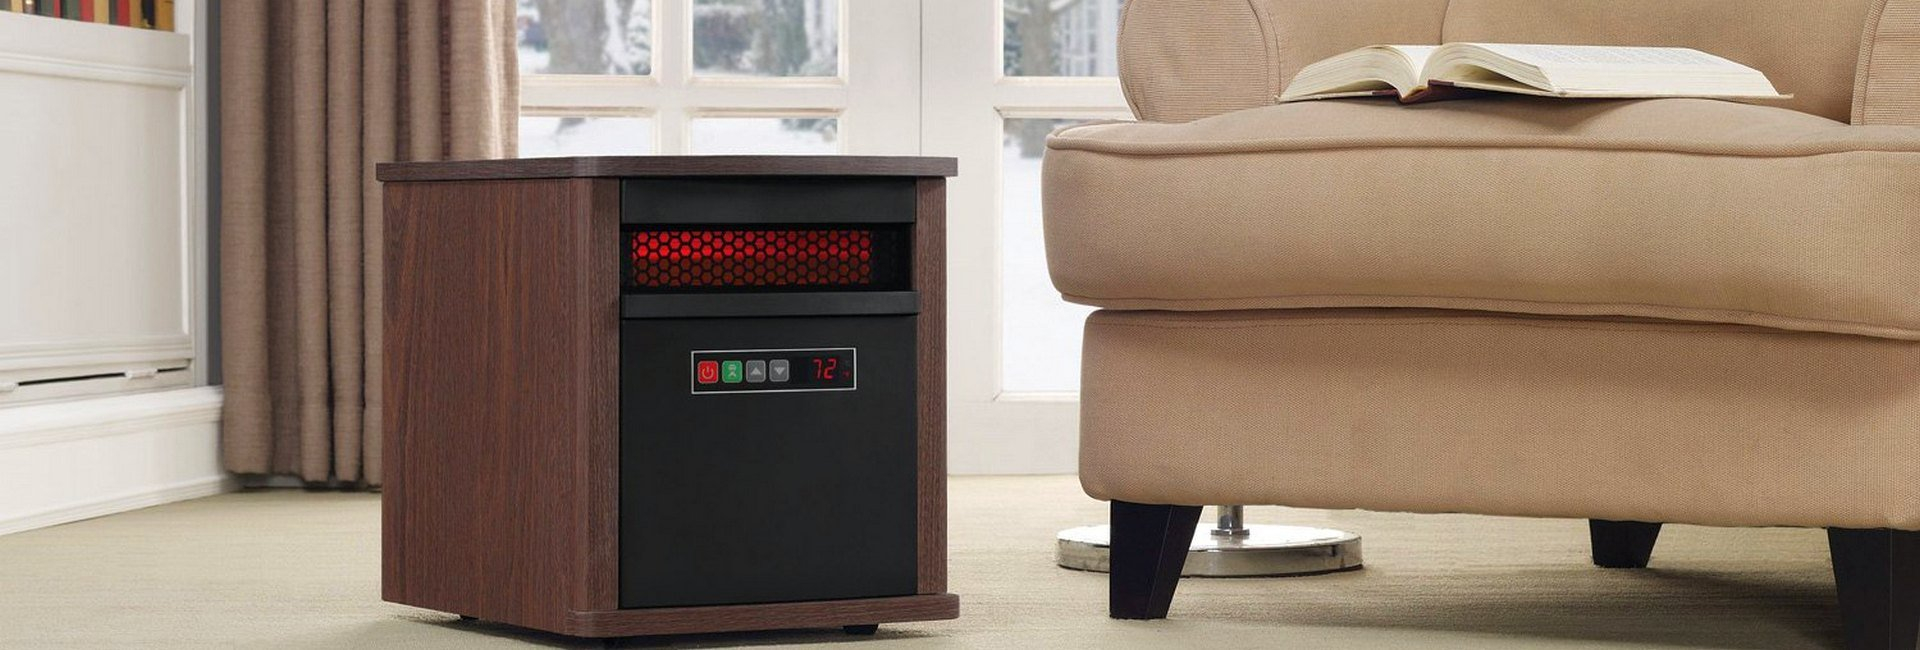 9 Best Heaters For Large Rooms Apr 2020 Reviews with regard to measurements 1920 X 650